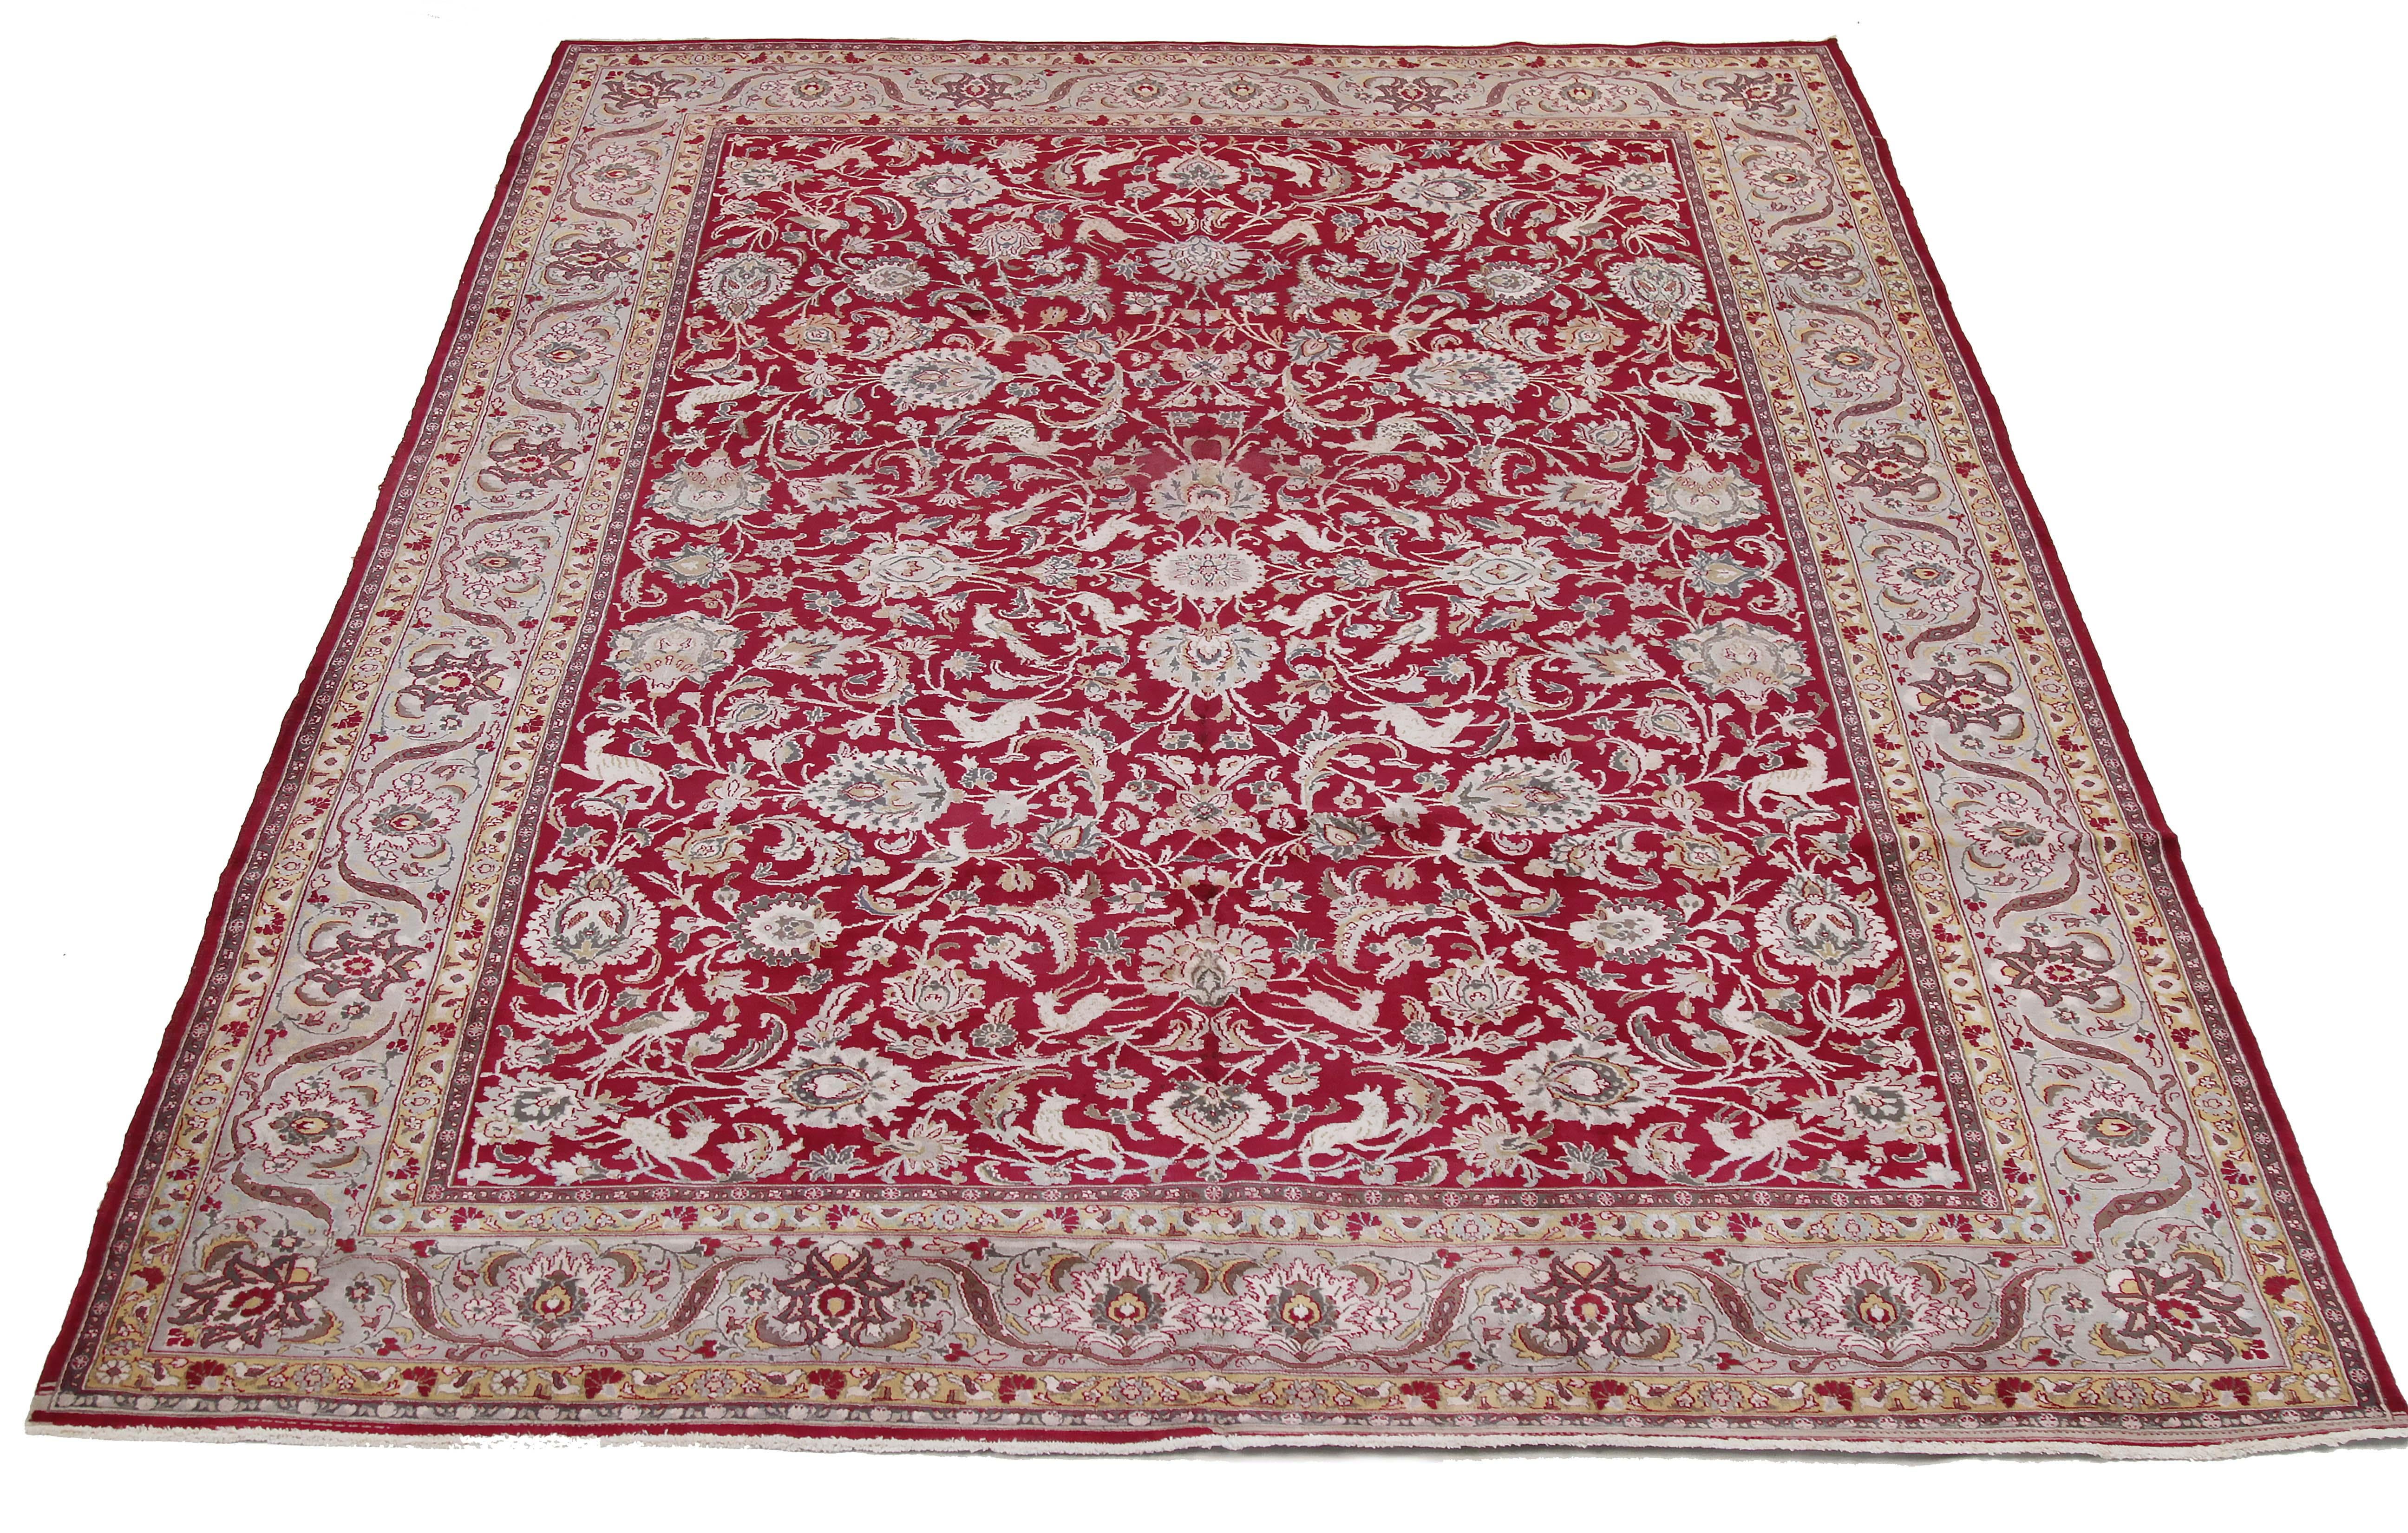 Antique Persian rug handwoven from the finest sheep’s wool and colored with all-natural vegetable dyes that are safe for humans and pets. It’s a traditional Tabriz weaving featuring a lovely ensemble of floral designs in beige and ivory over an